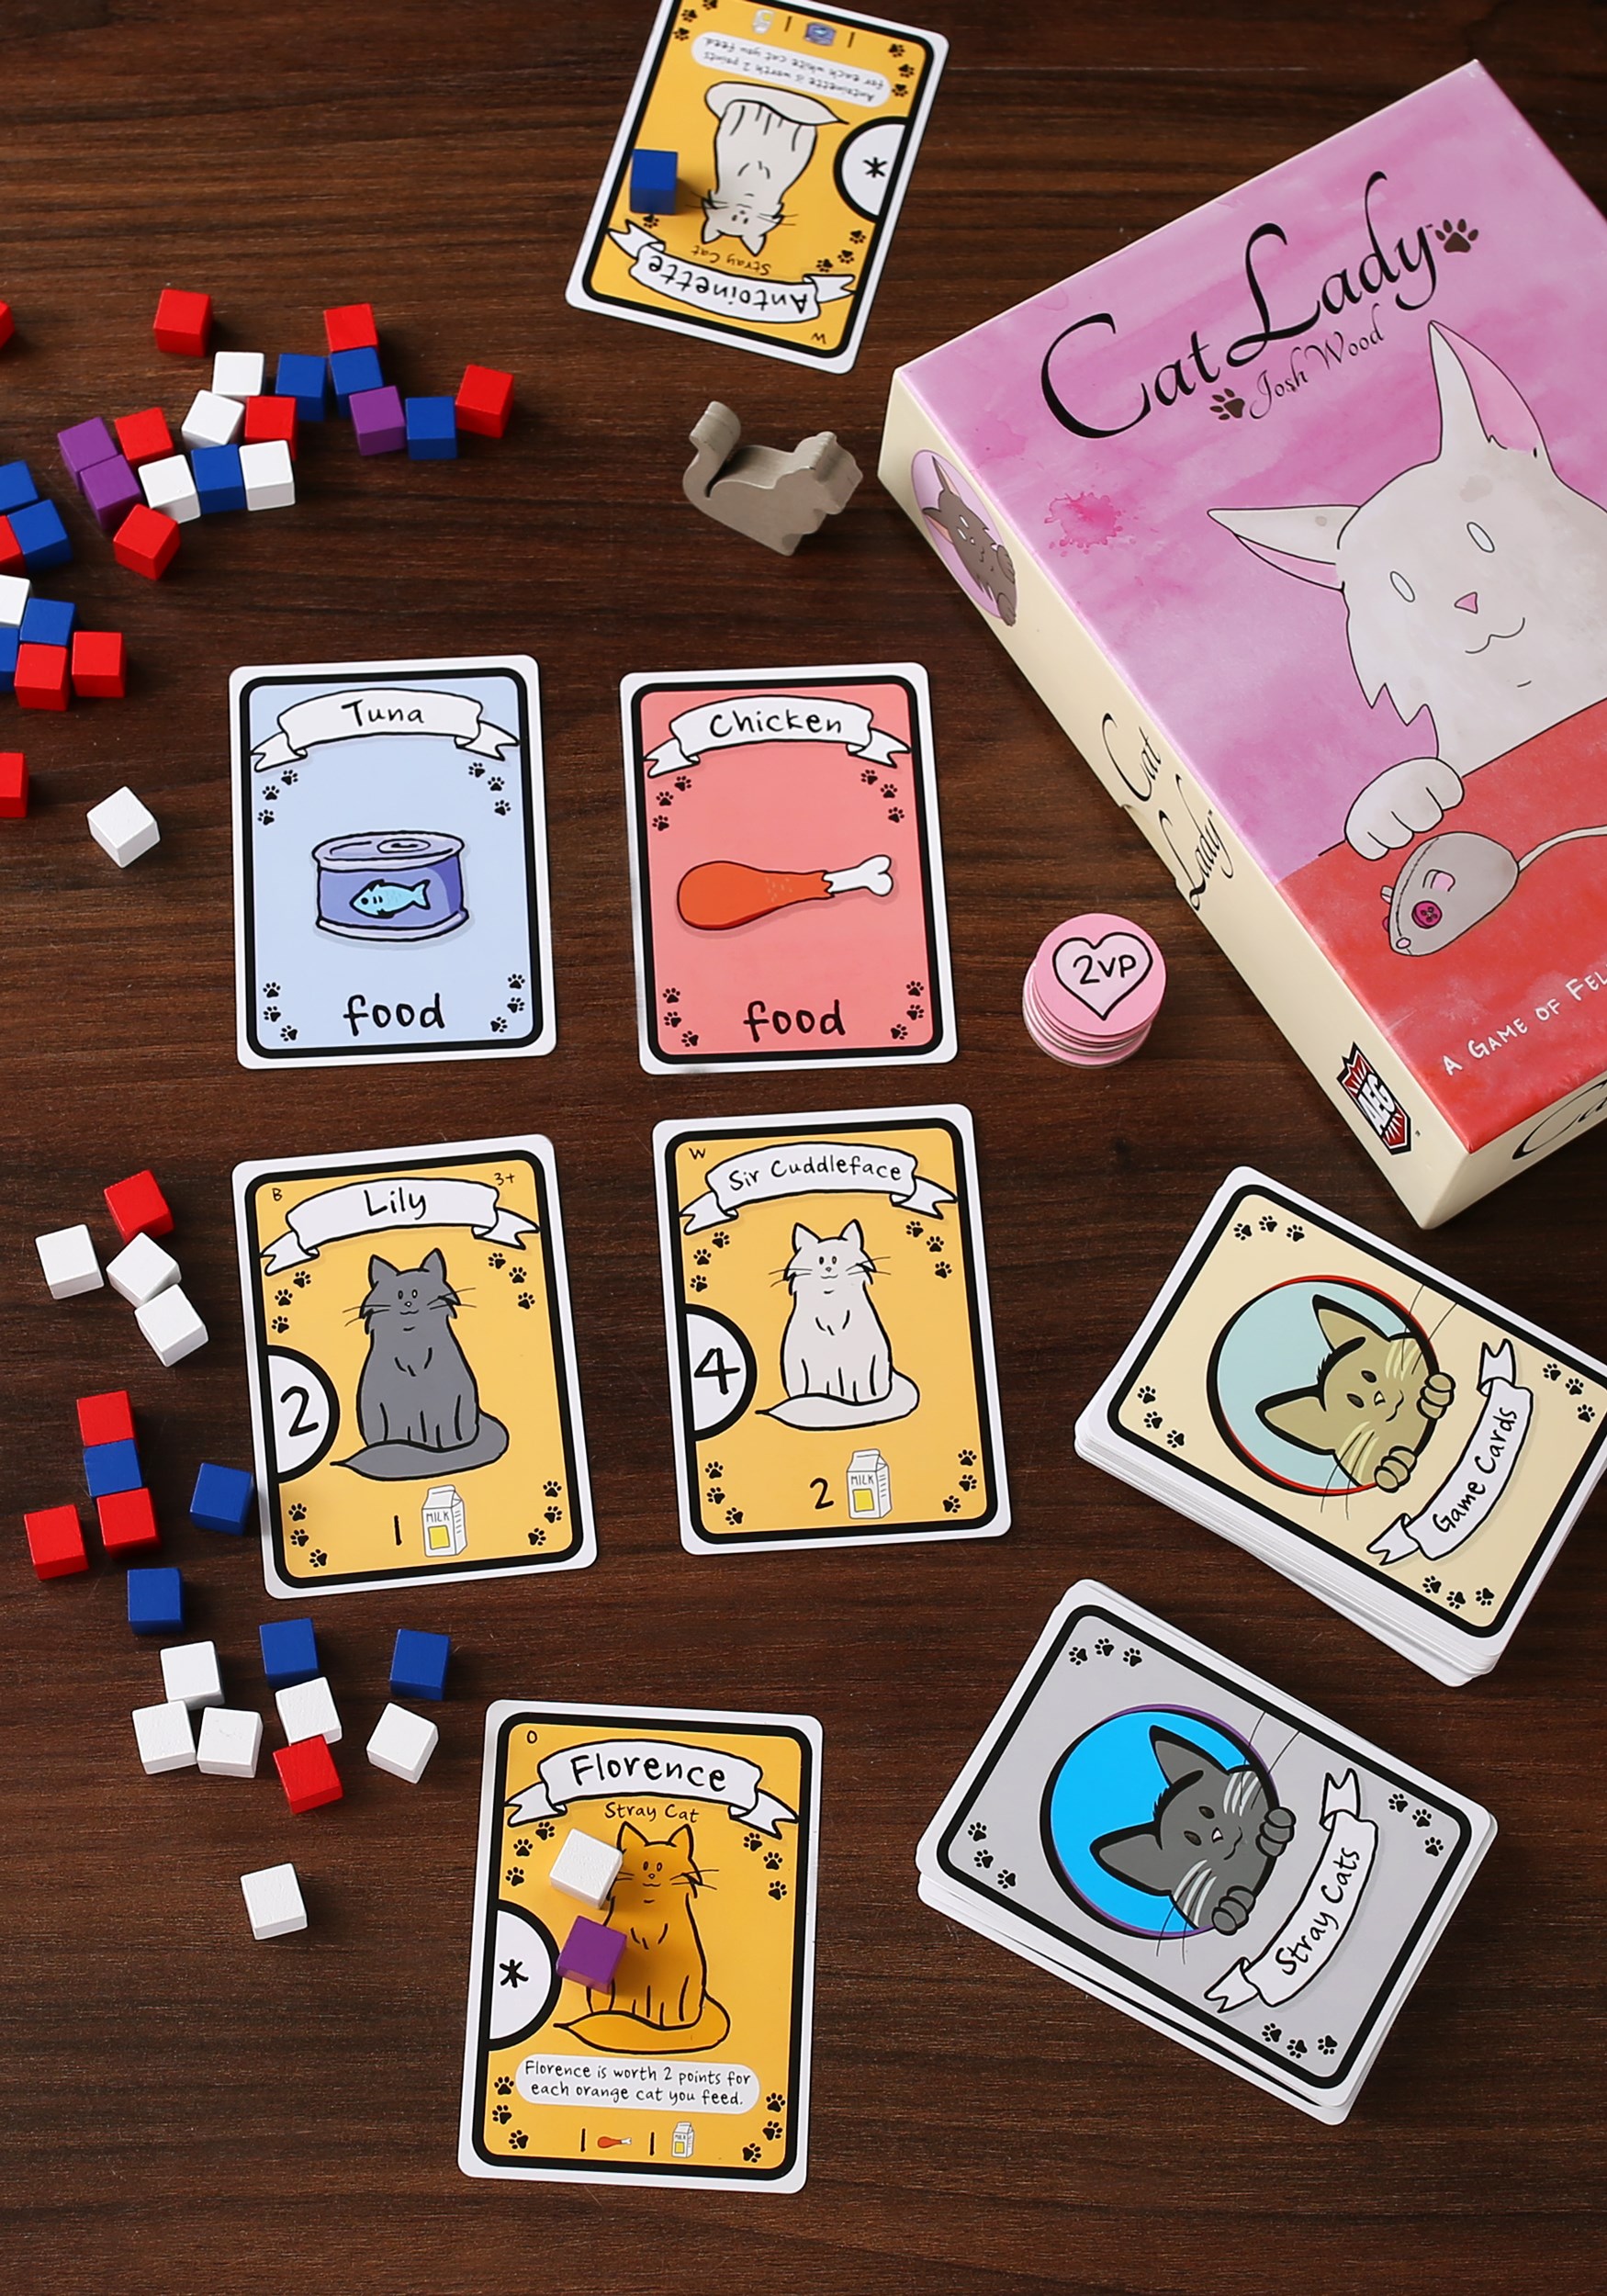 Cat Lady Card Game